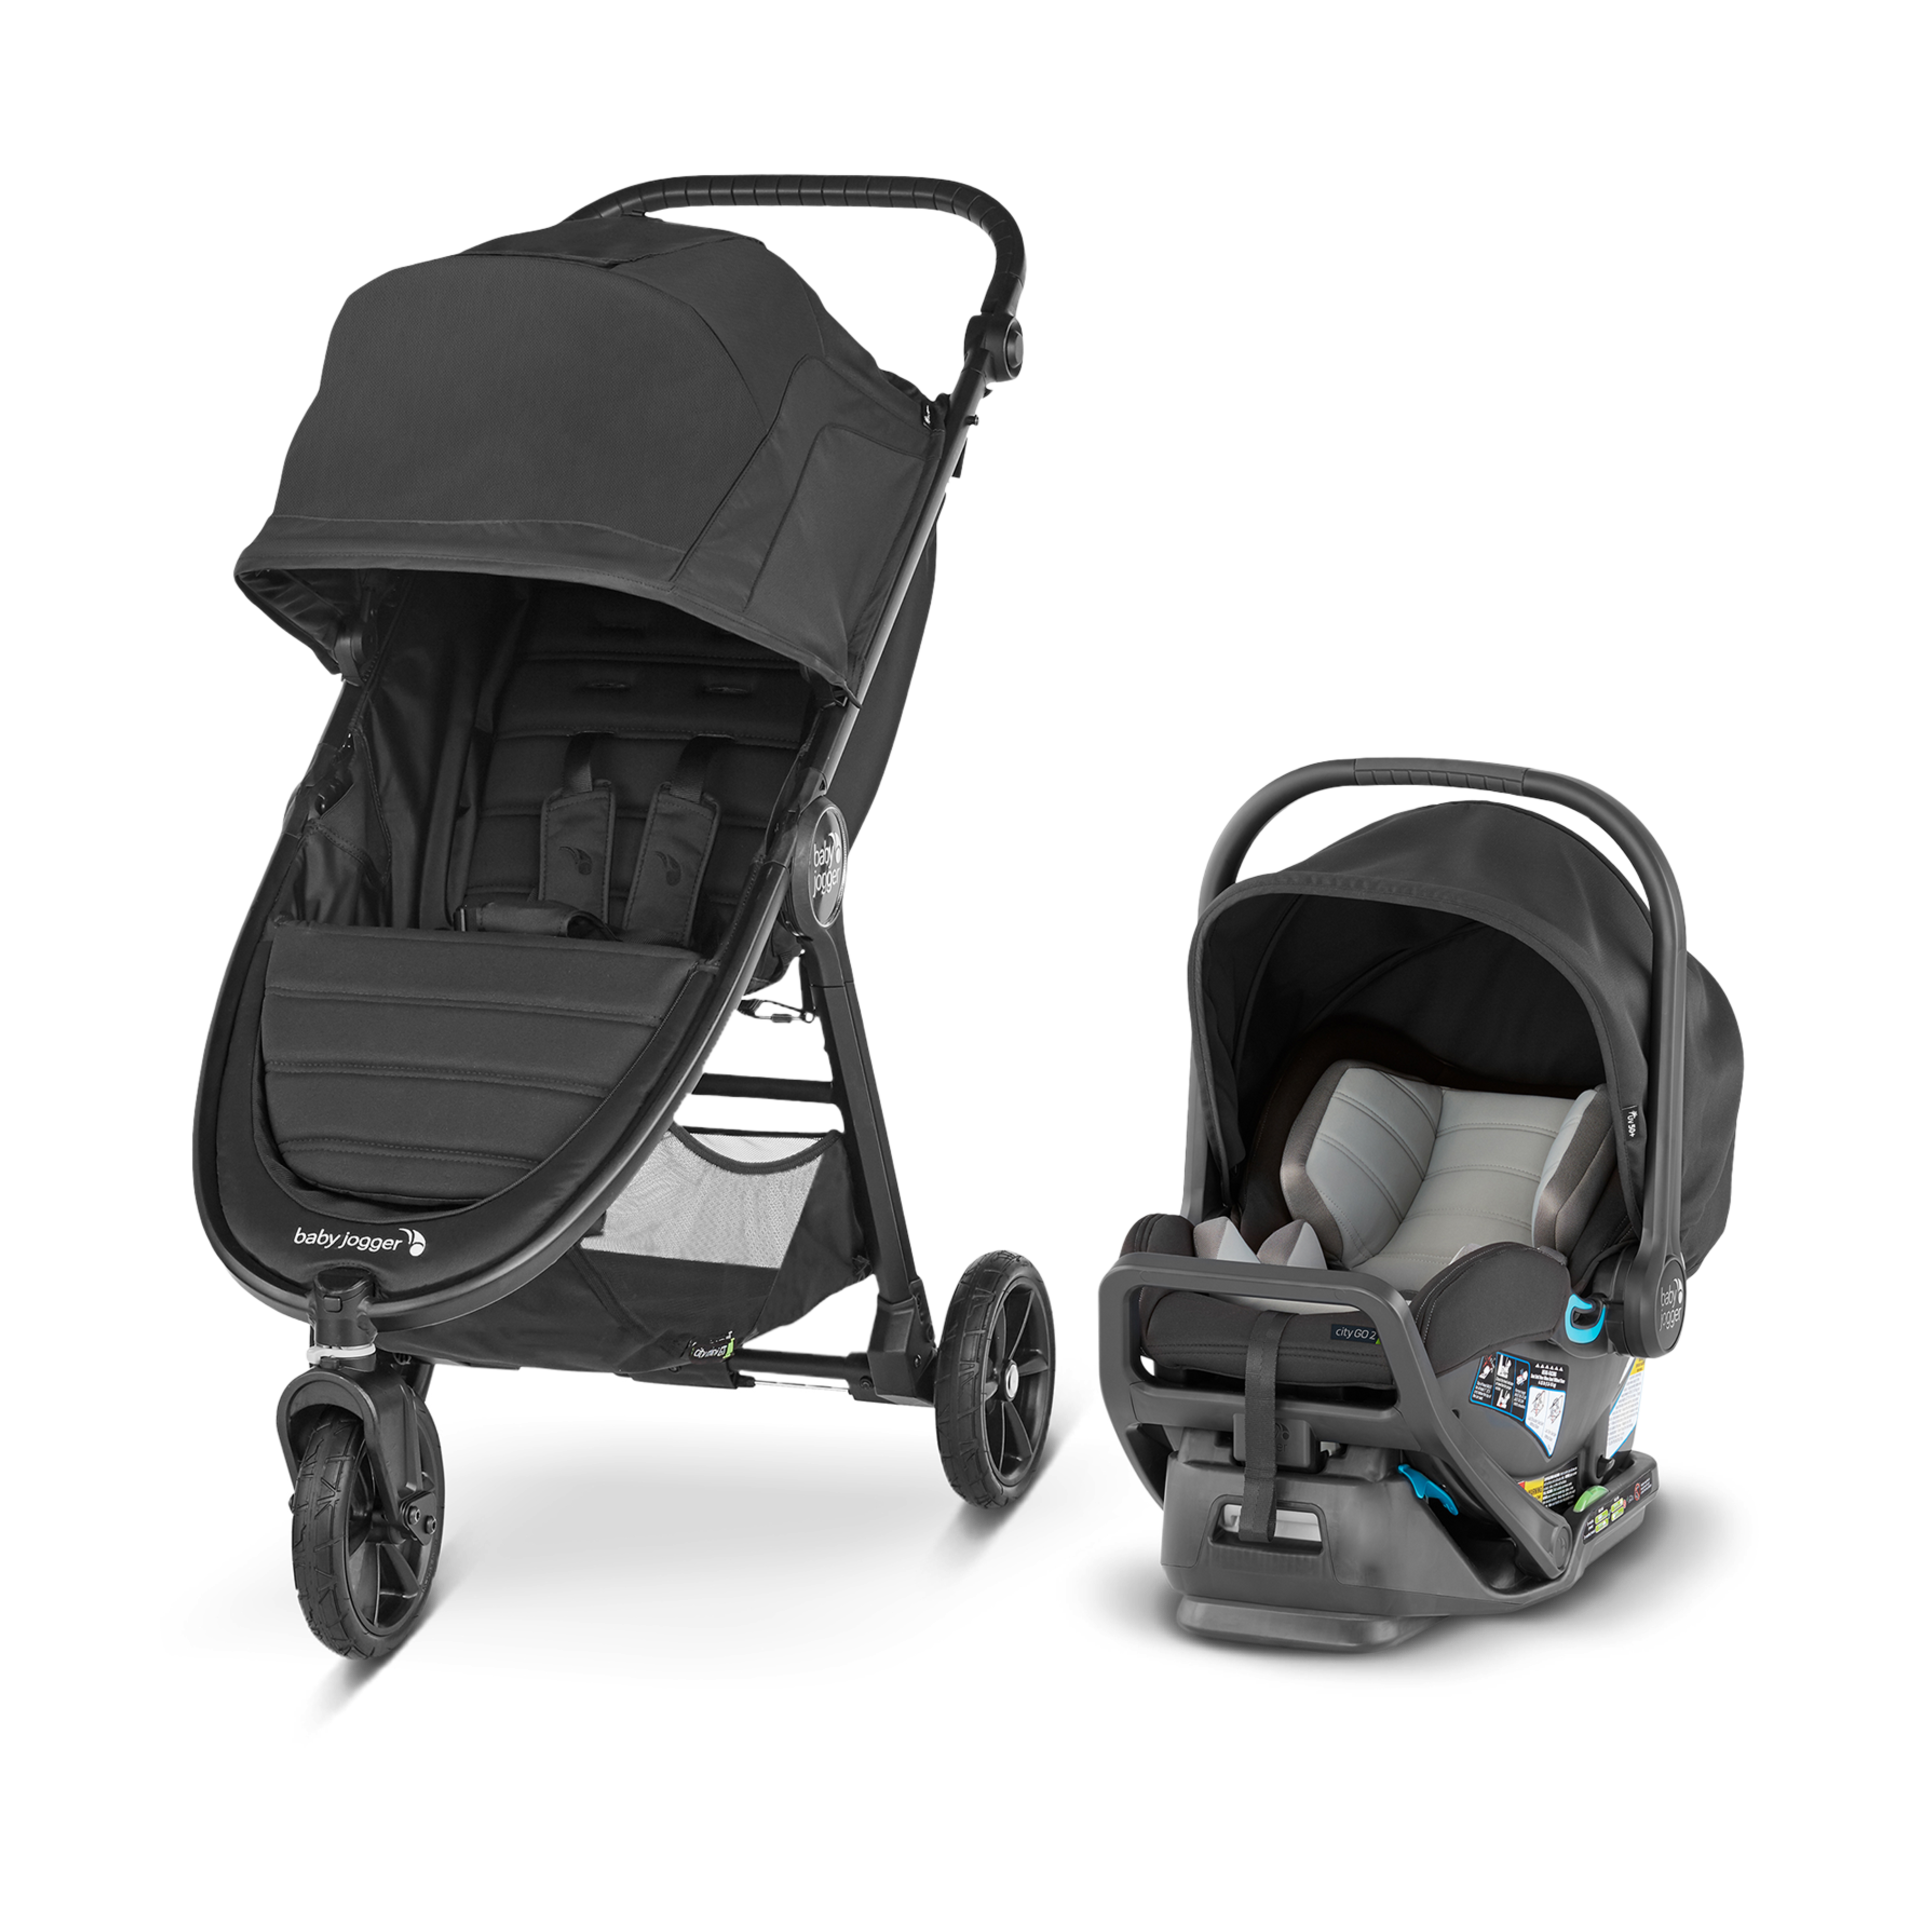 baby travel system near me